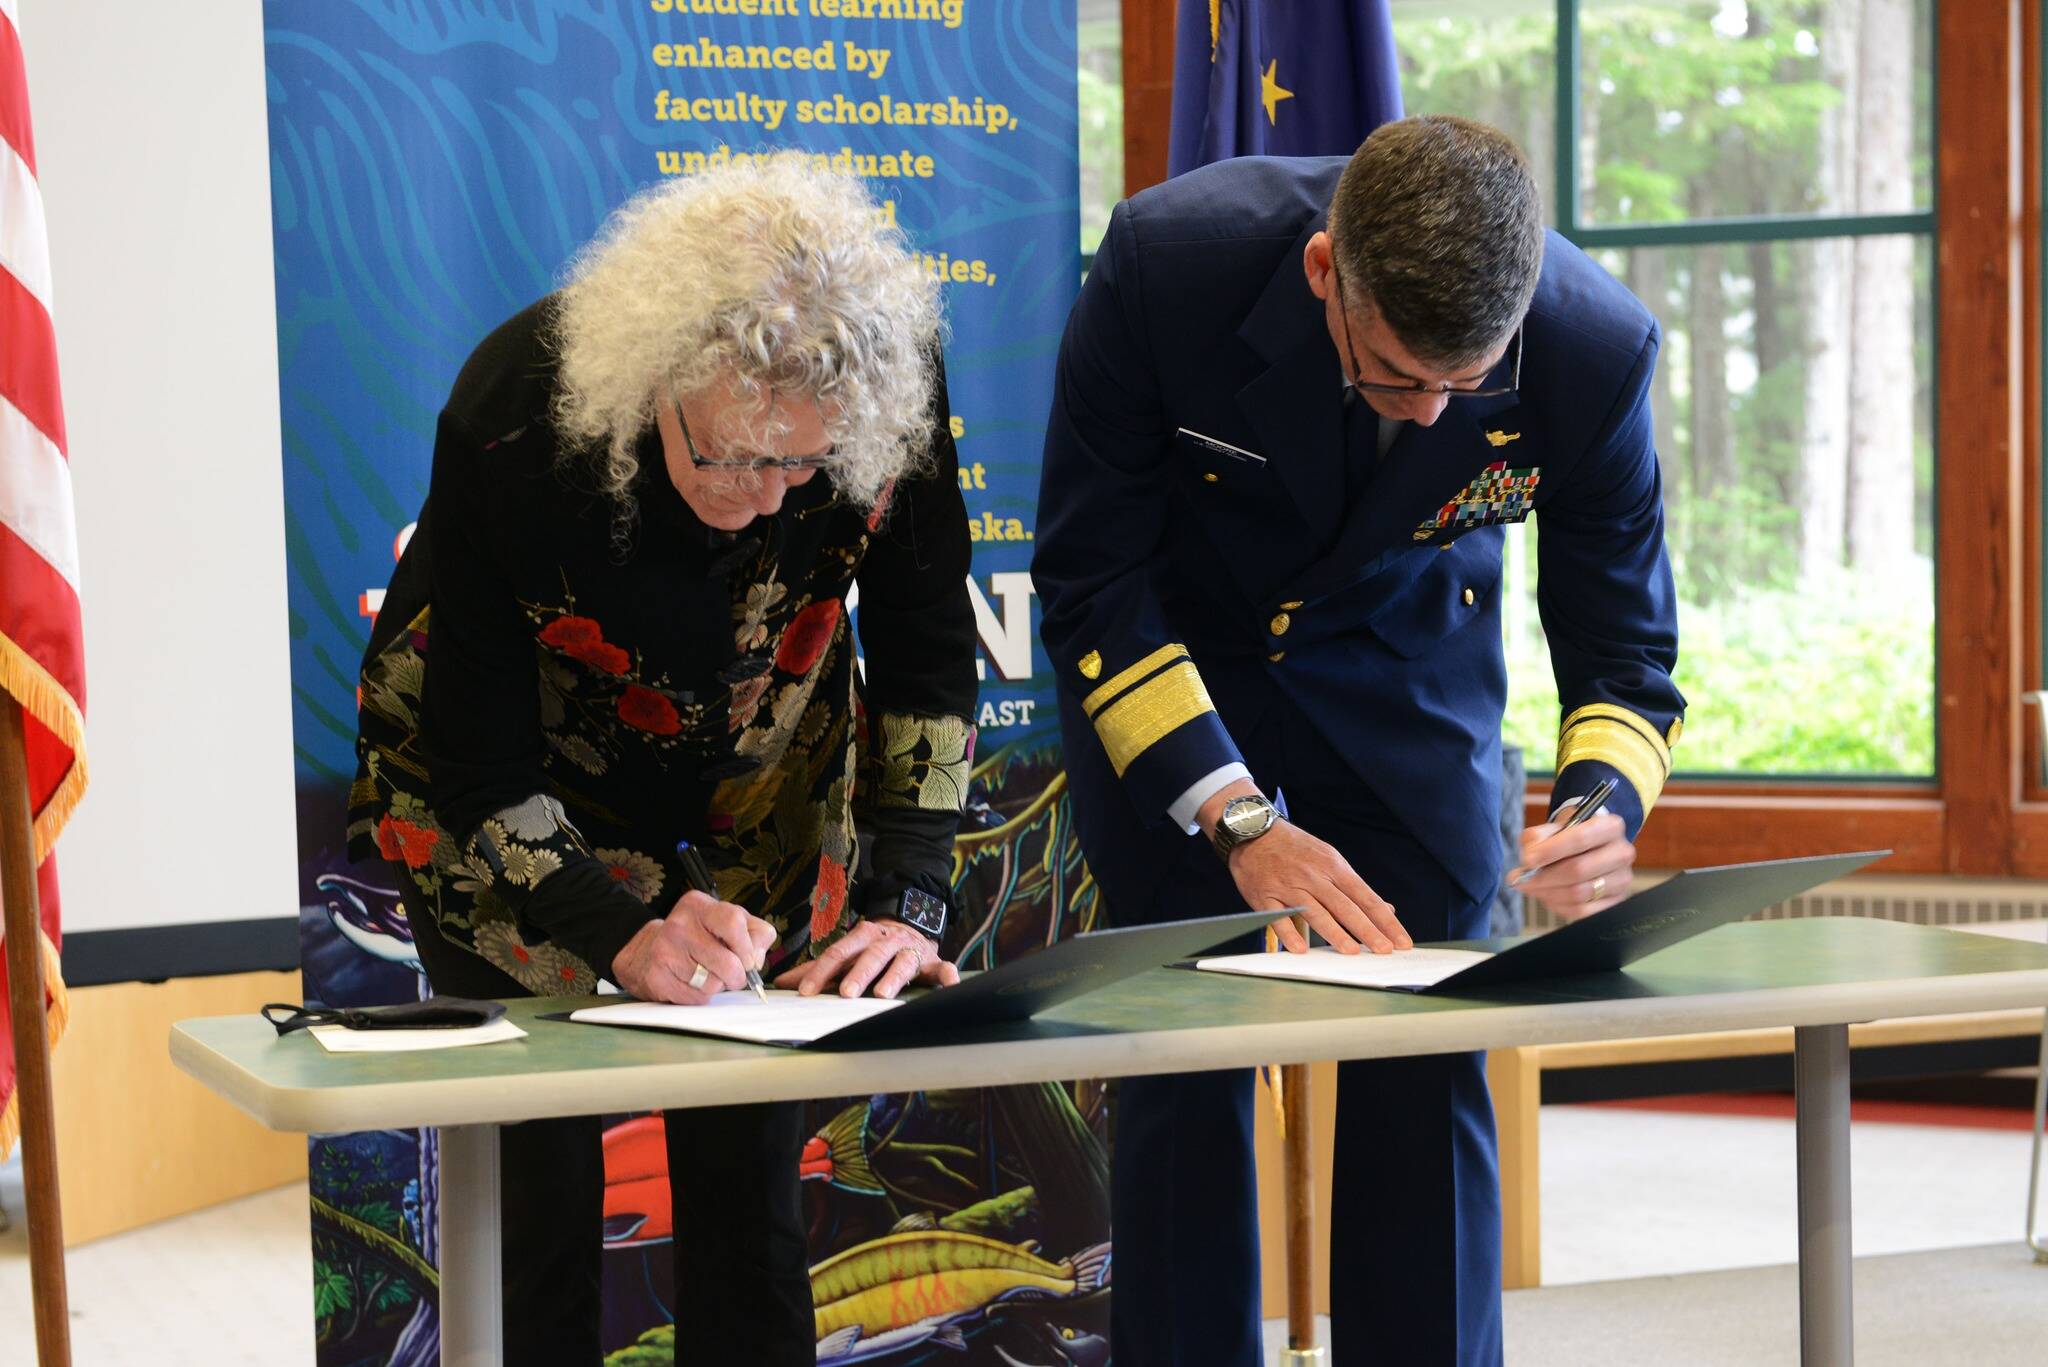 University of Alaska Southeast chancellor Karen Carey, left, and Rear Adm. Nathan Moore, commander of Coast Guard District 17, sign a memorandum of agreement for renewal of the College Student Pre-Commissioning Initiative at the college on July 25, 2022. (Courtesy photo / USCG)